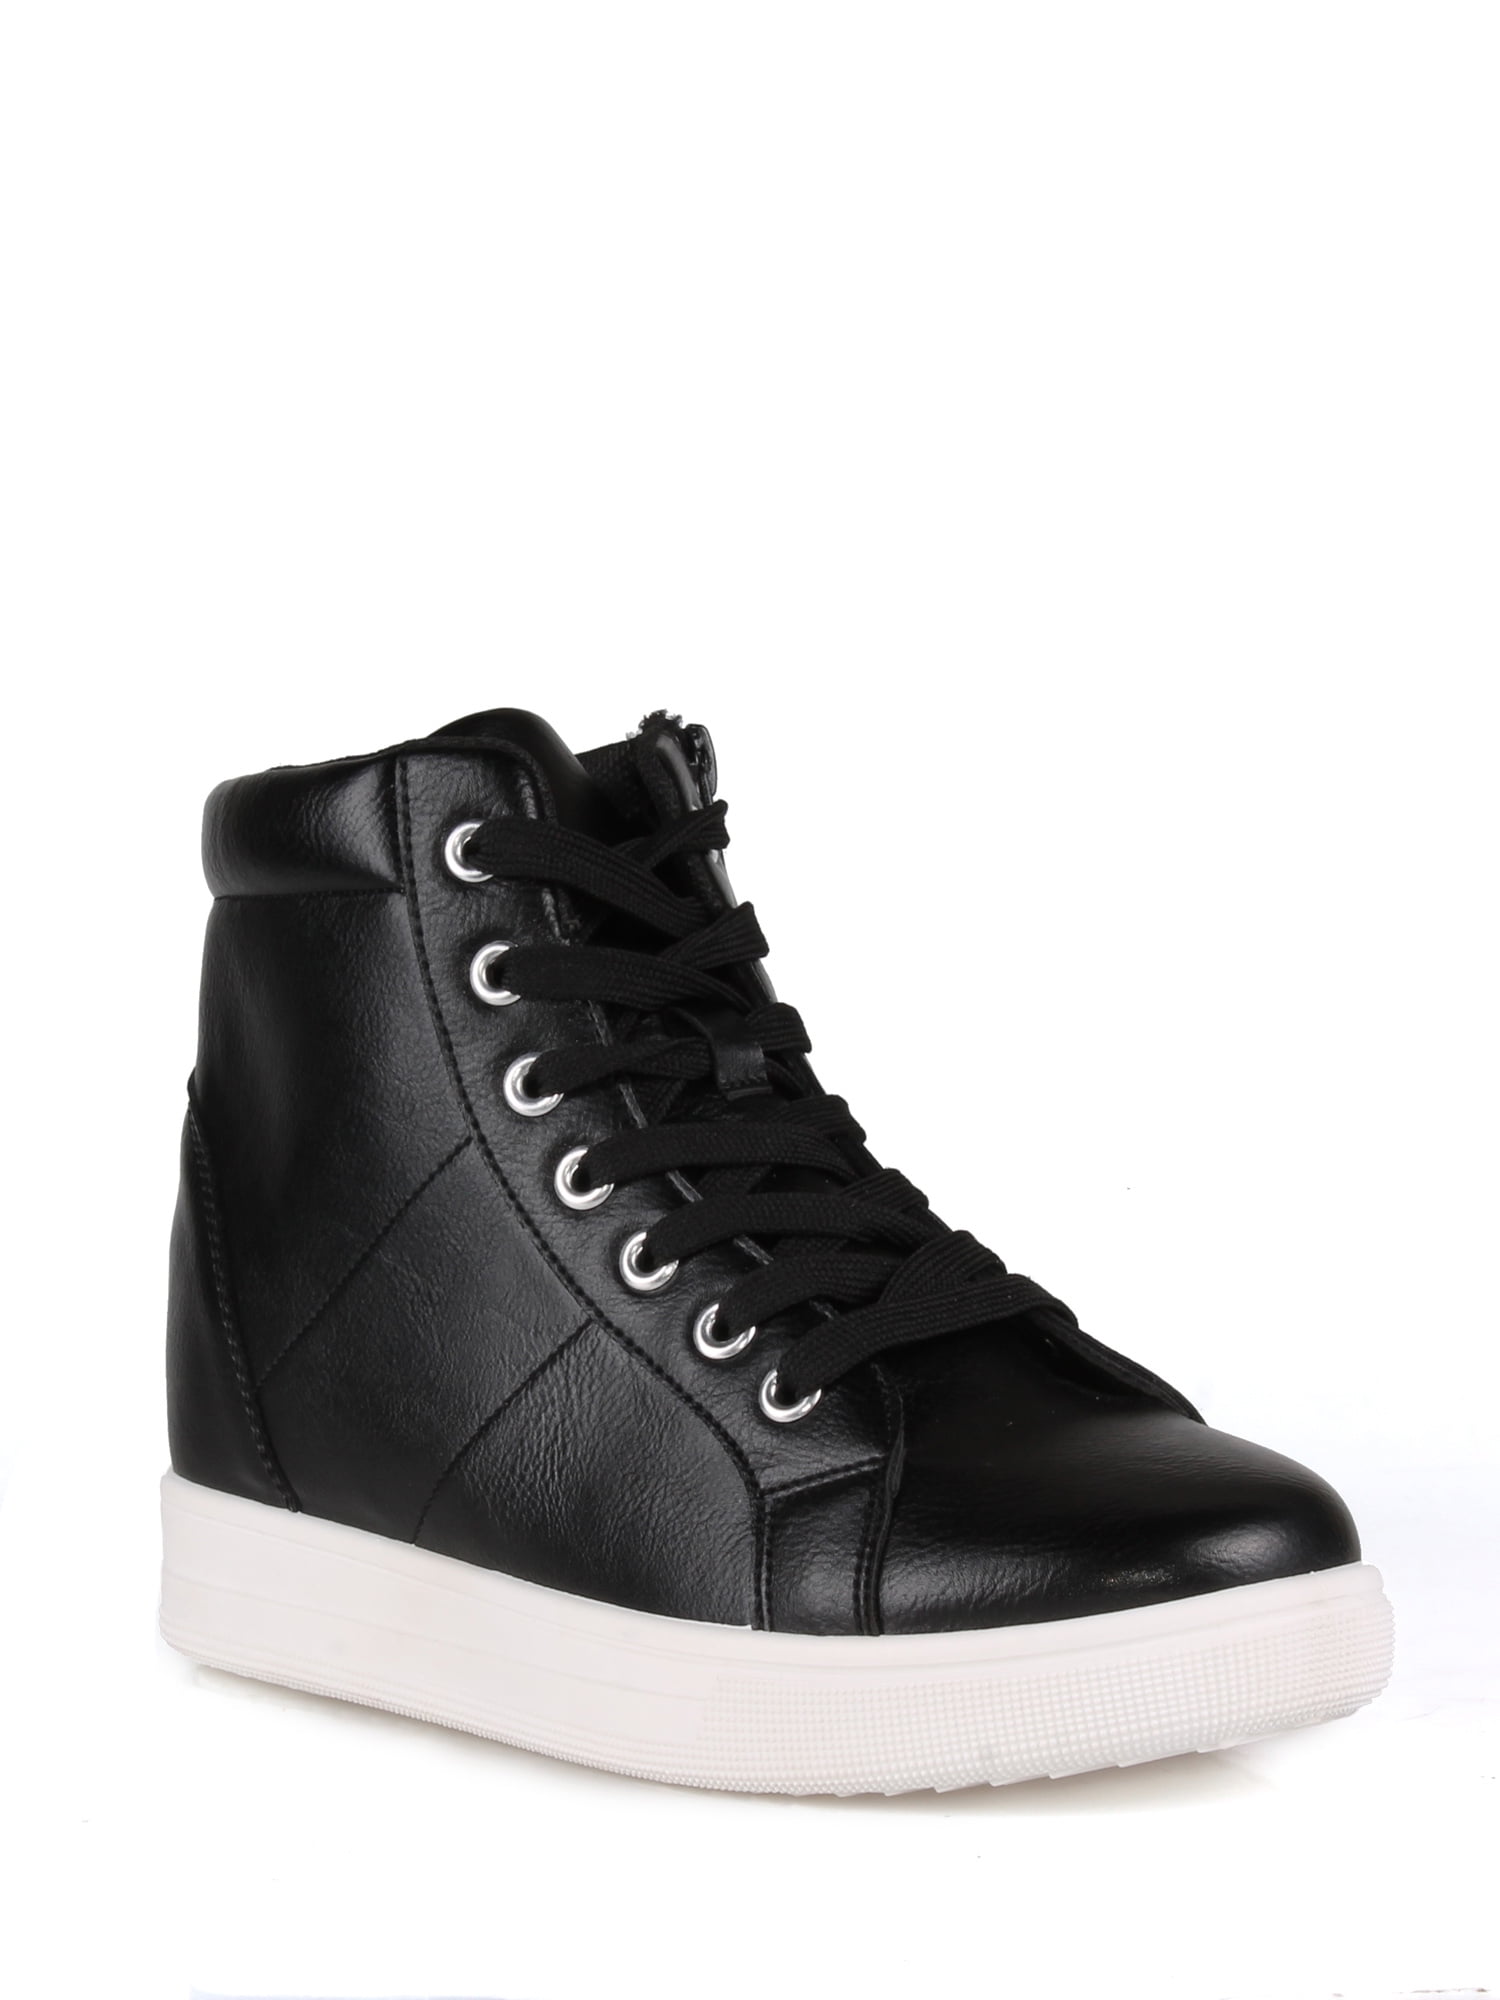 Black wedge sneakers with a zipper 2666-10 - KeeShoes